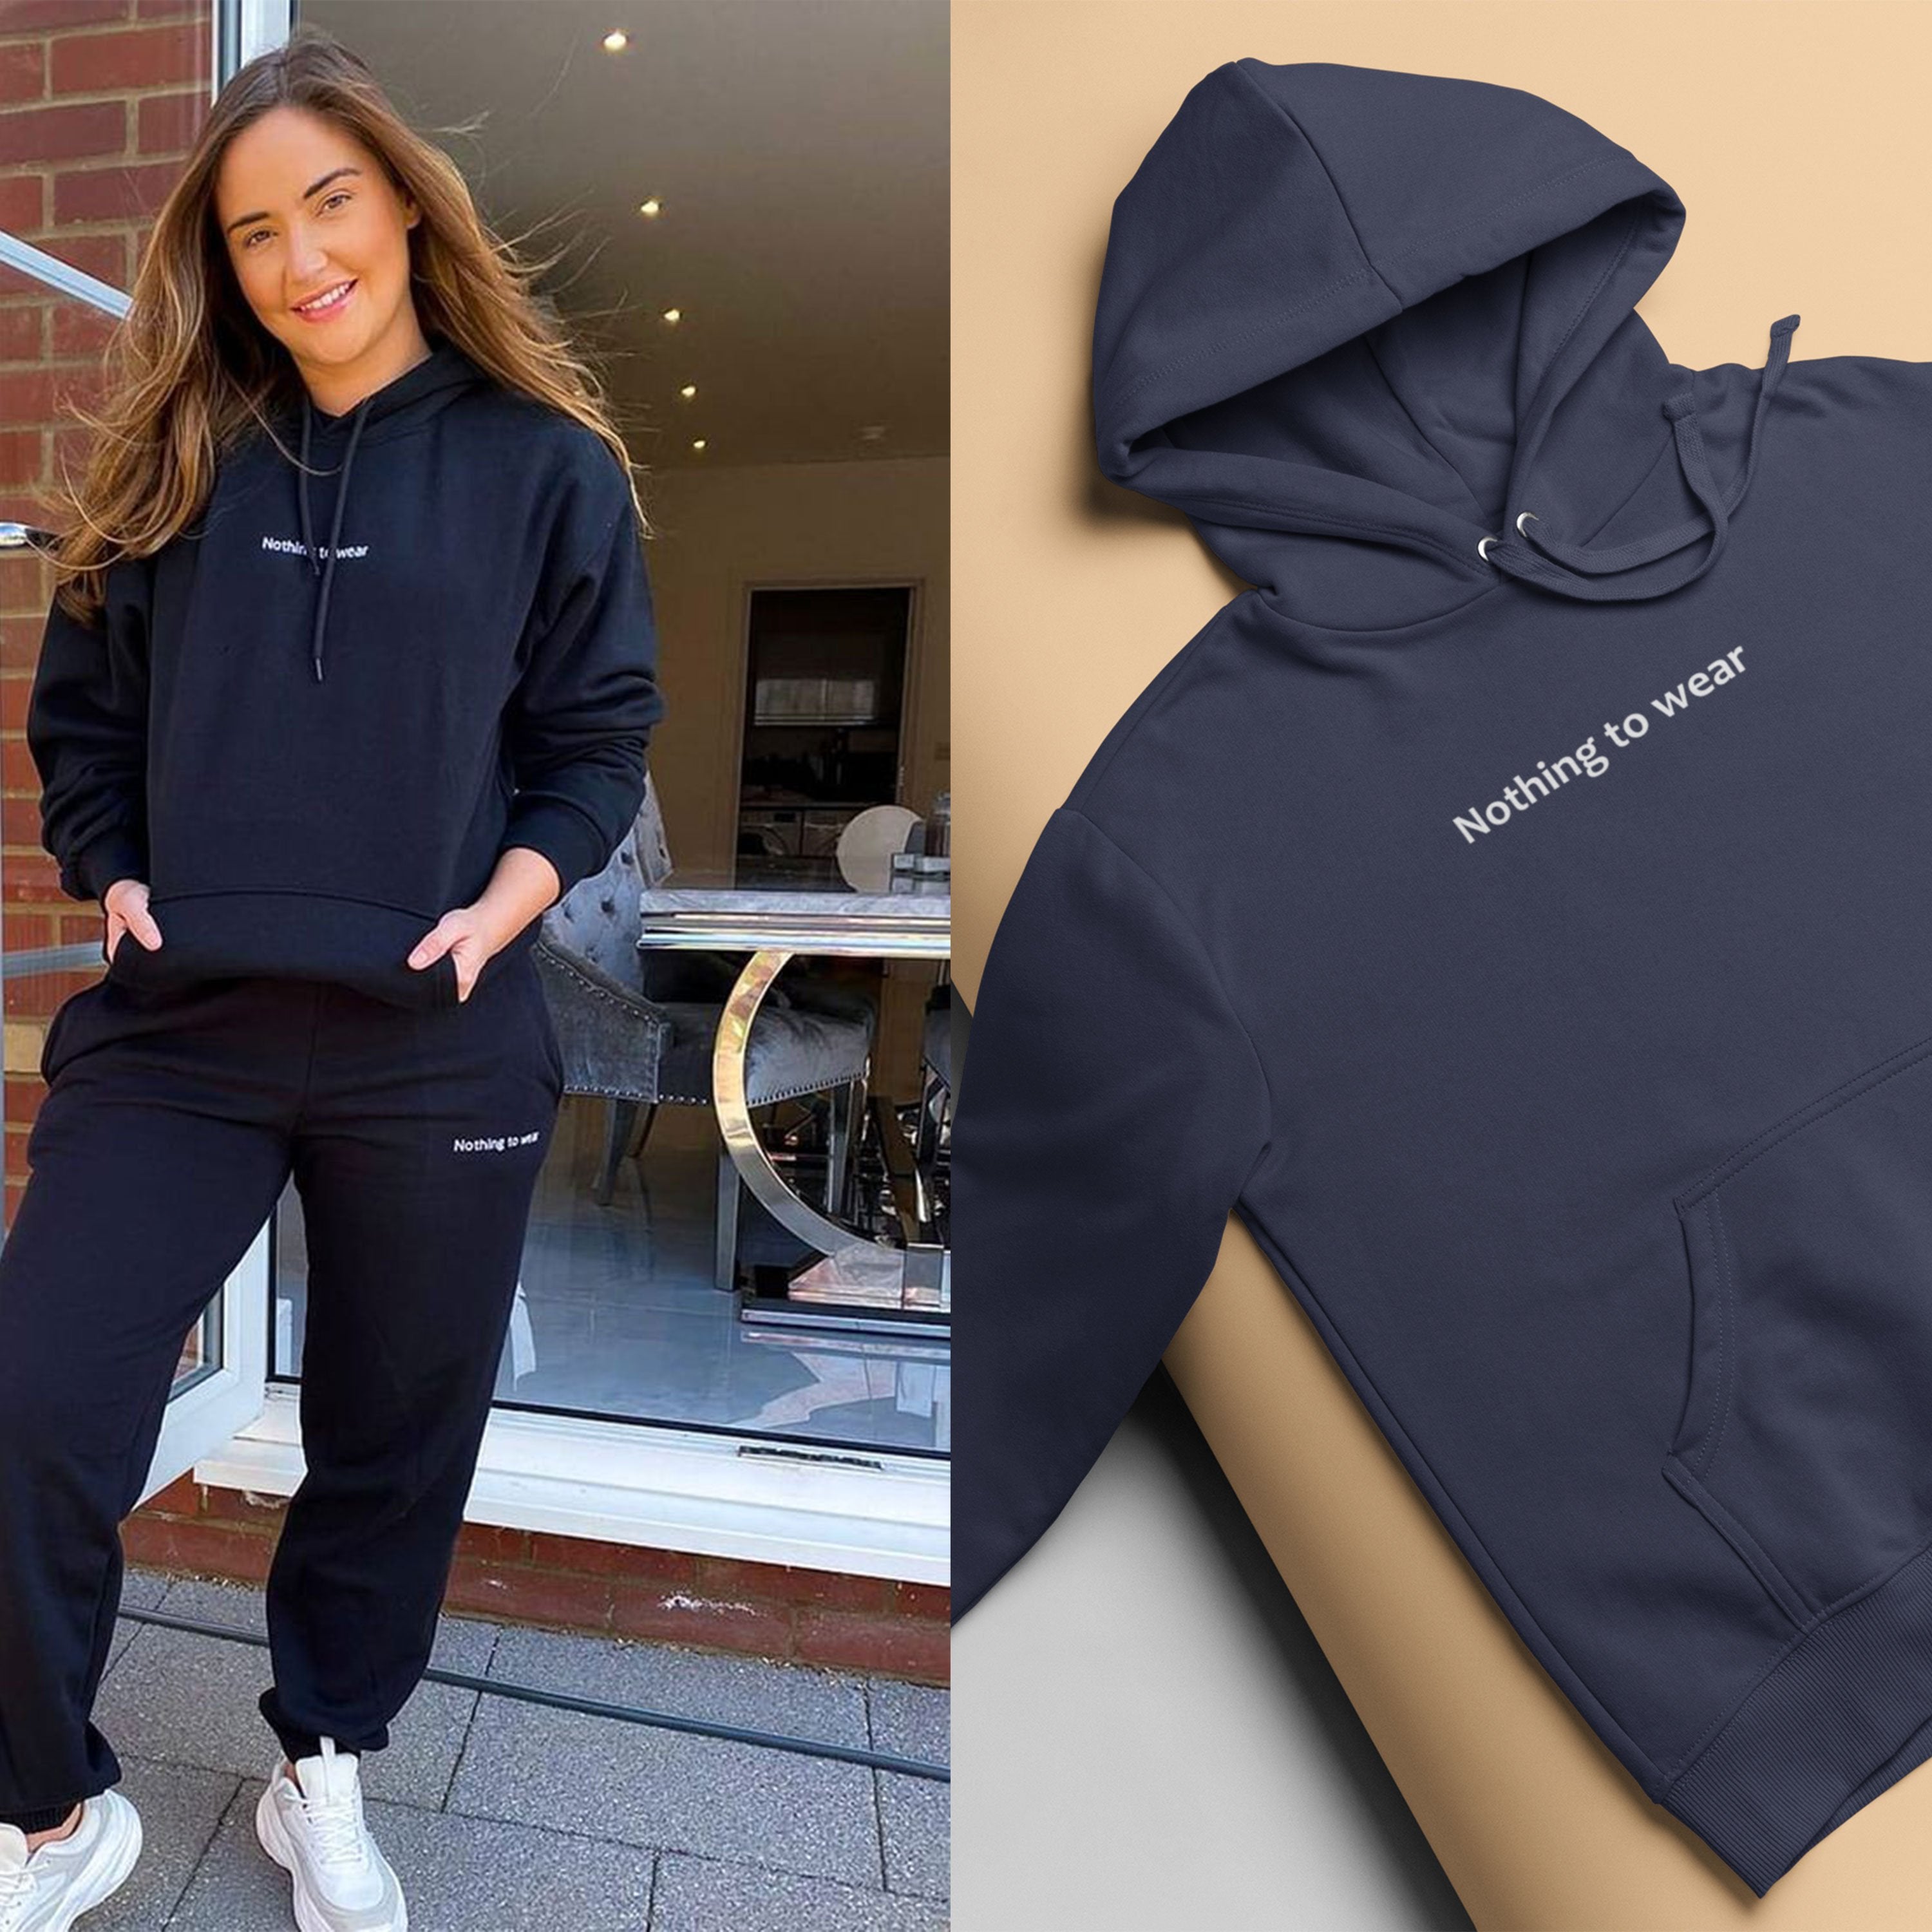 Nothing To Wear Jacqueline Jossa Celebrity Hoodies -FunkyTradition